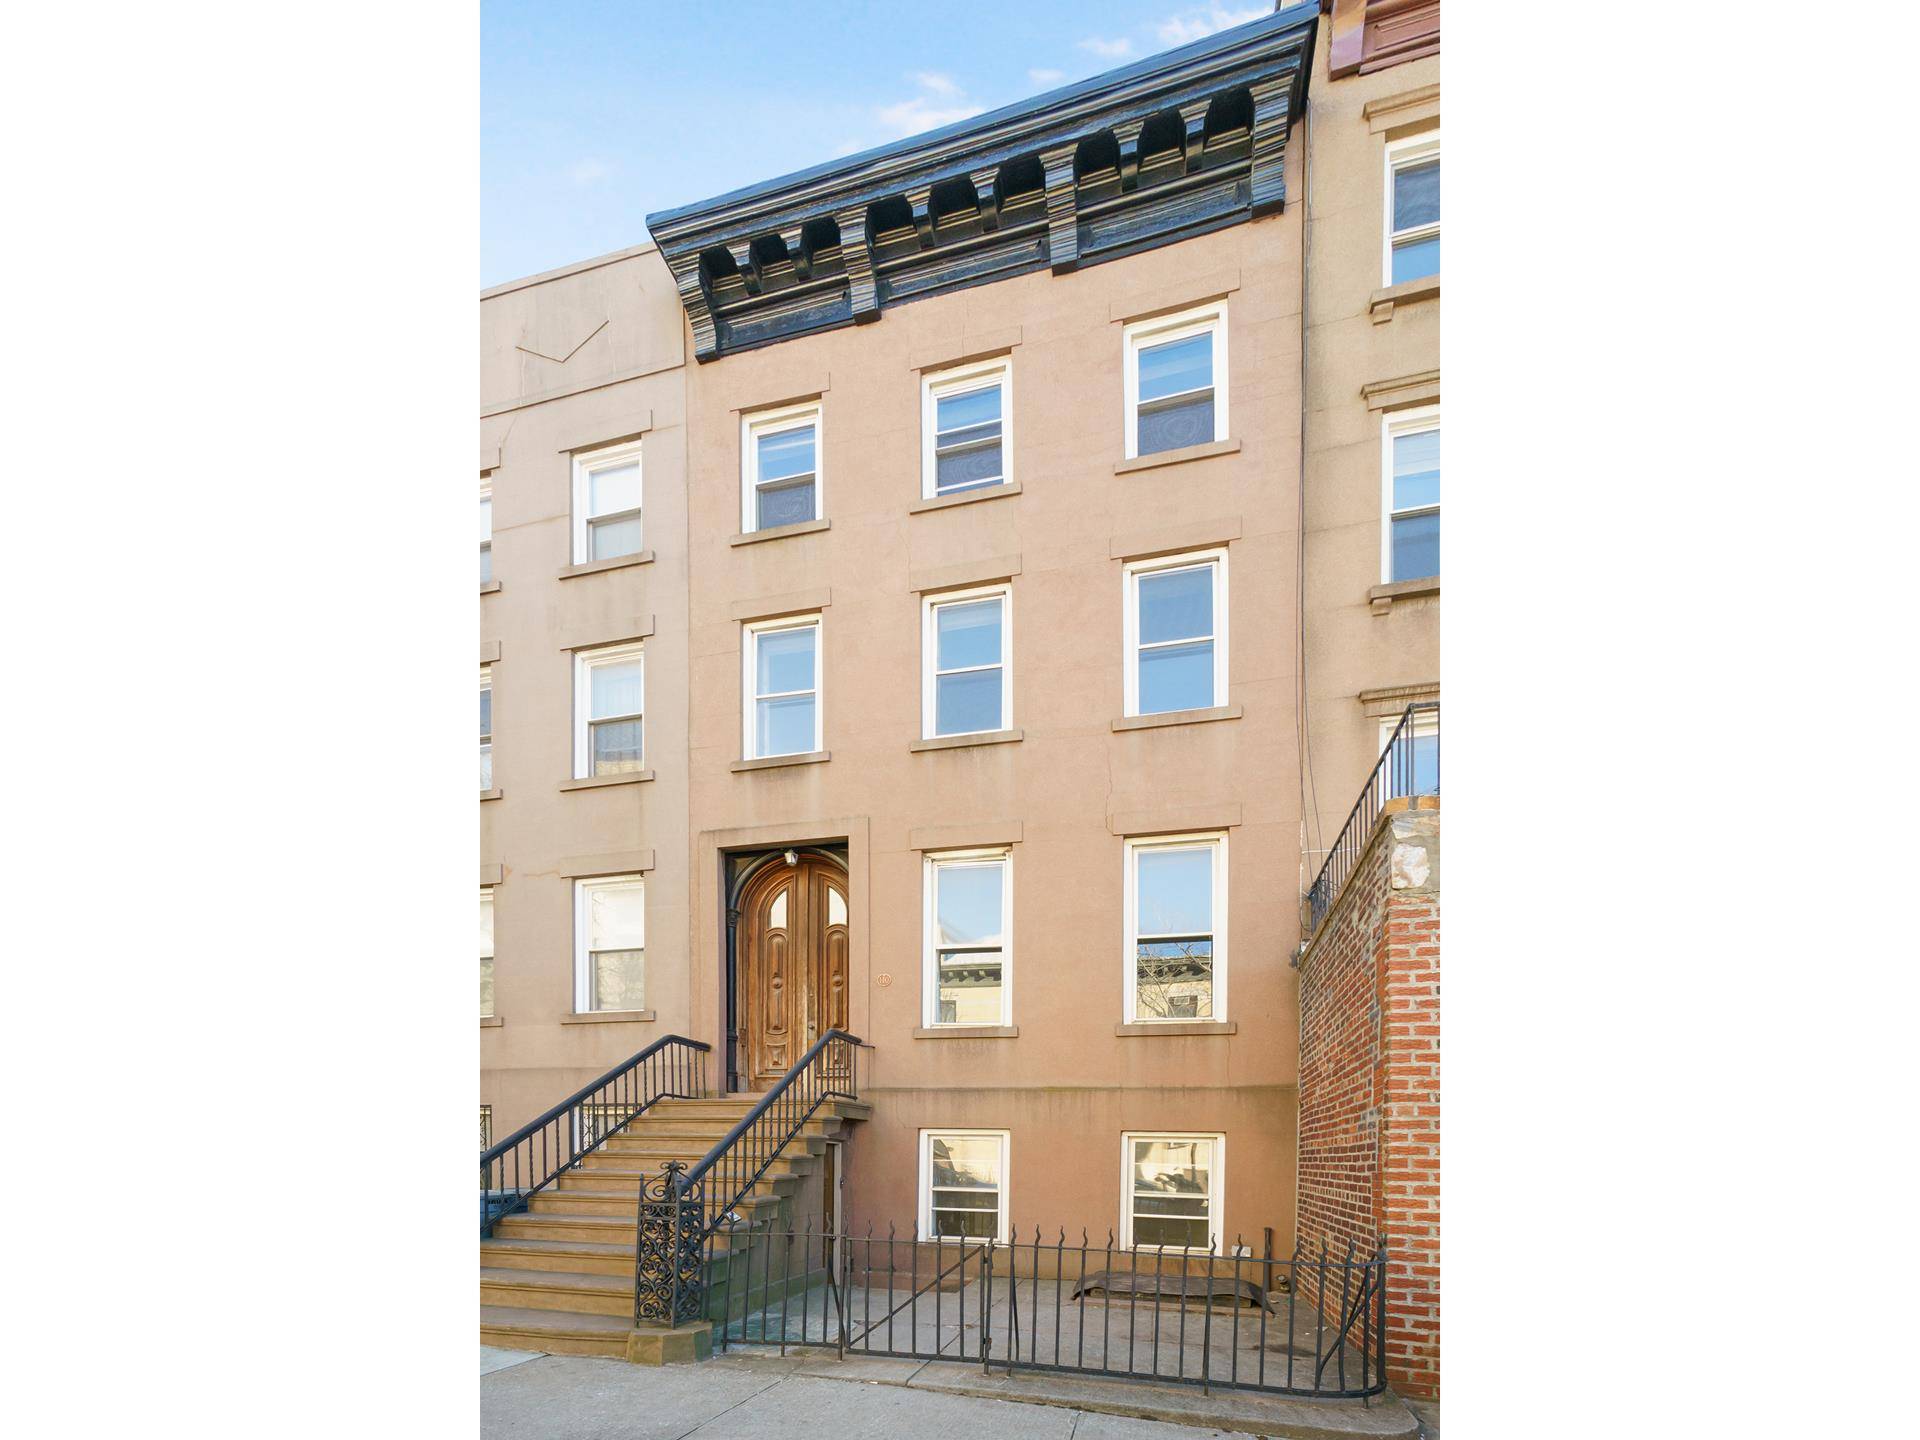 Situated on the cross roads of Carroll Gardens, Cobble Hill, and Columbia Waterfront, this 20 foot wide four story four family townhouse with South facing garden can be used in ...